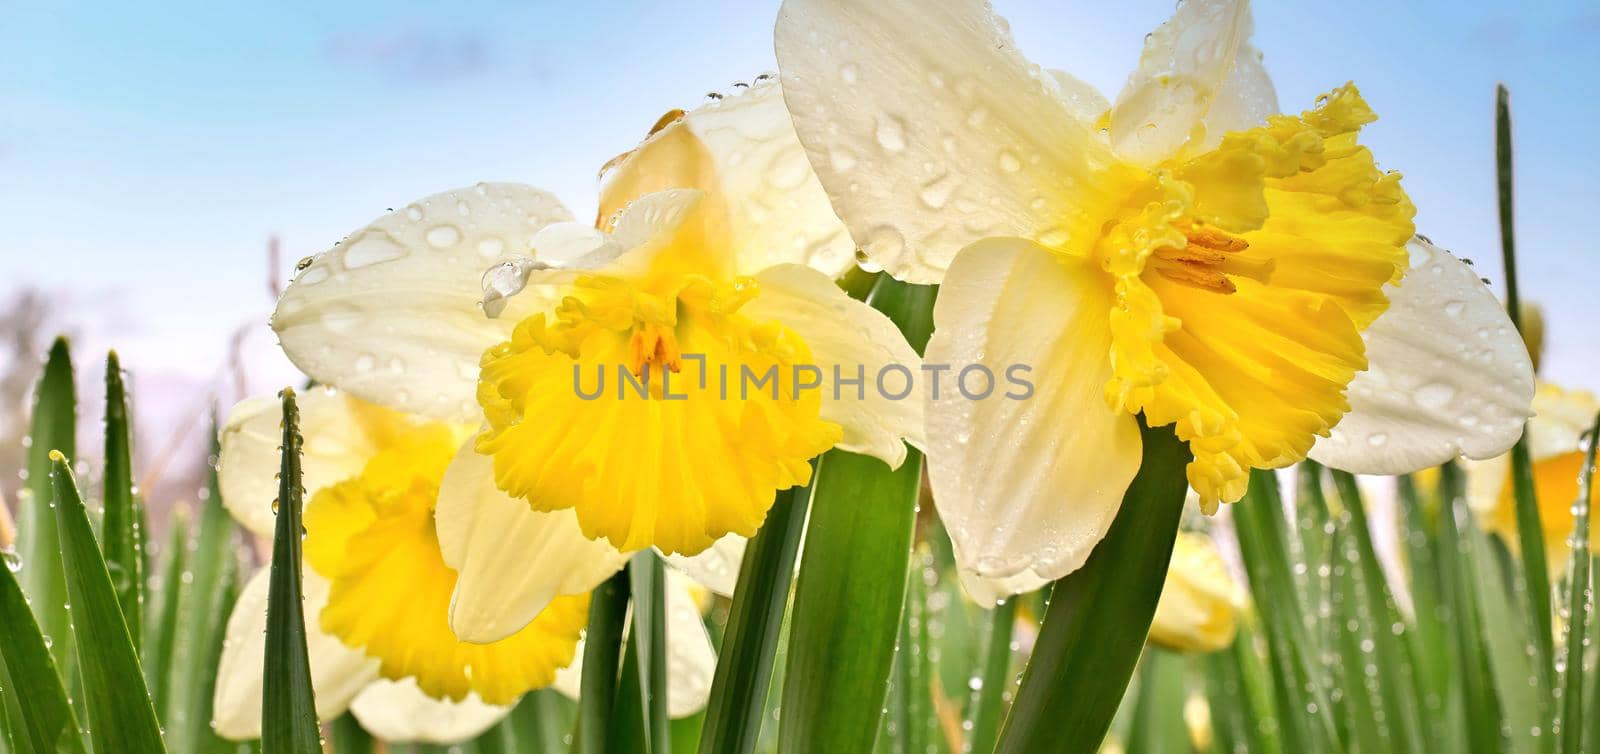 Ice Follies Daffodils Narcissus Resplendent with Fresh Raindrops after a Spring Rain by markvandam